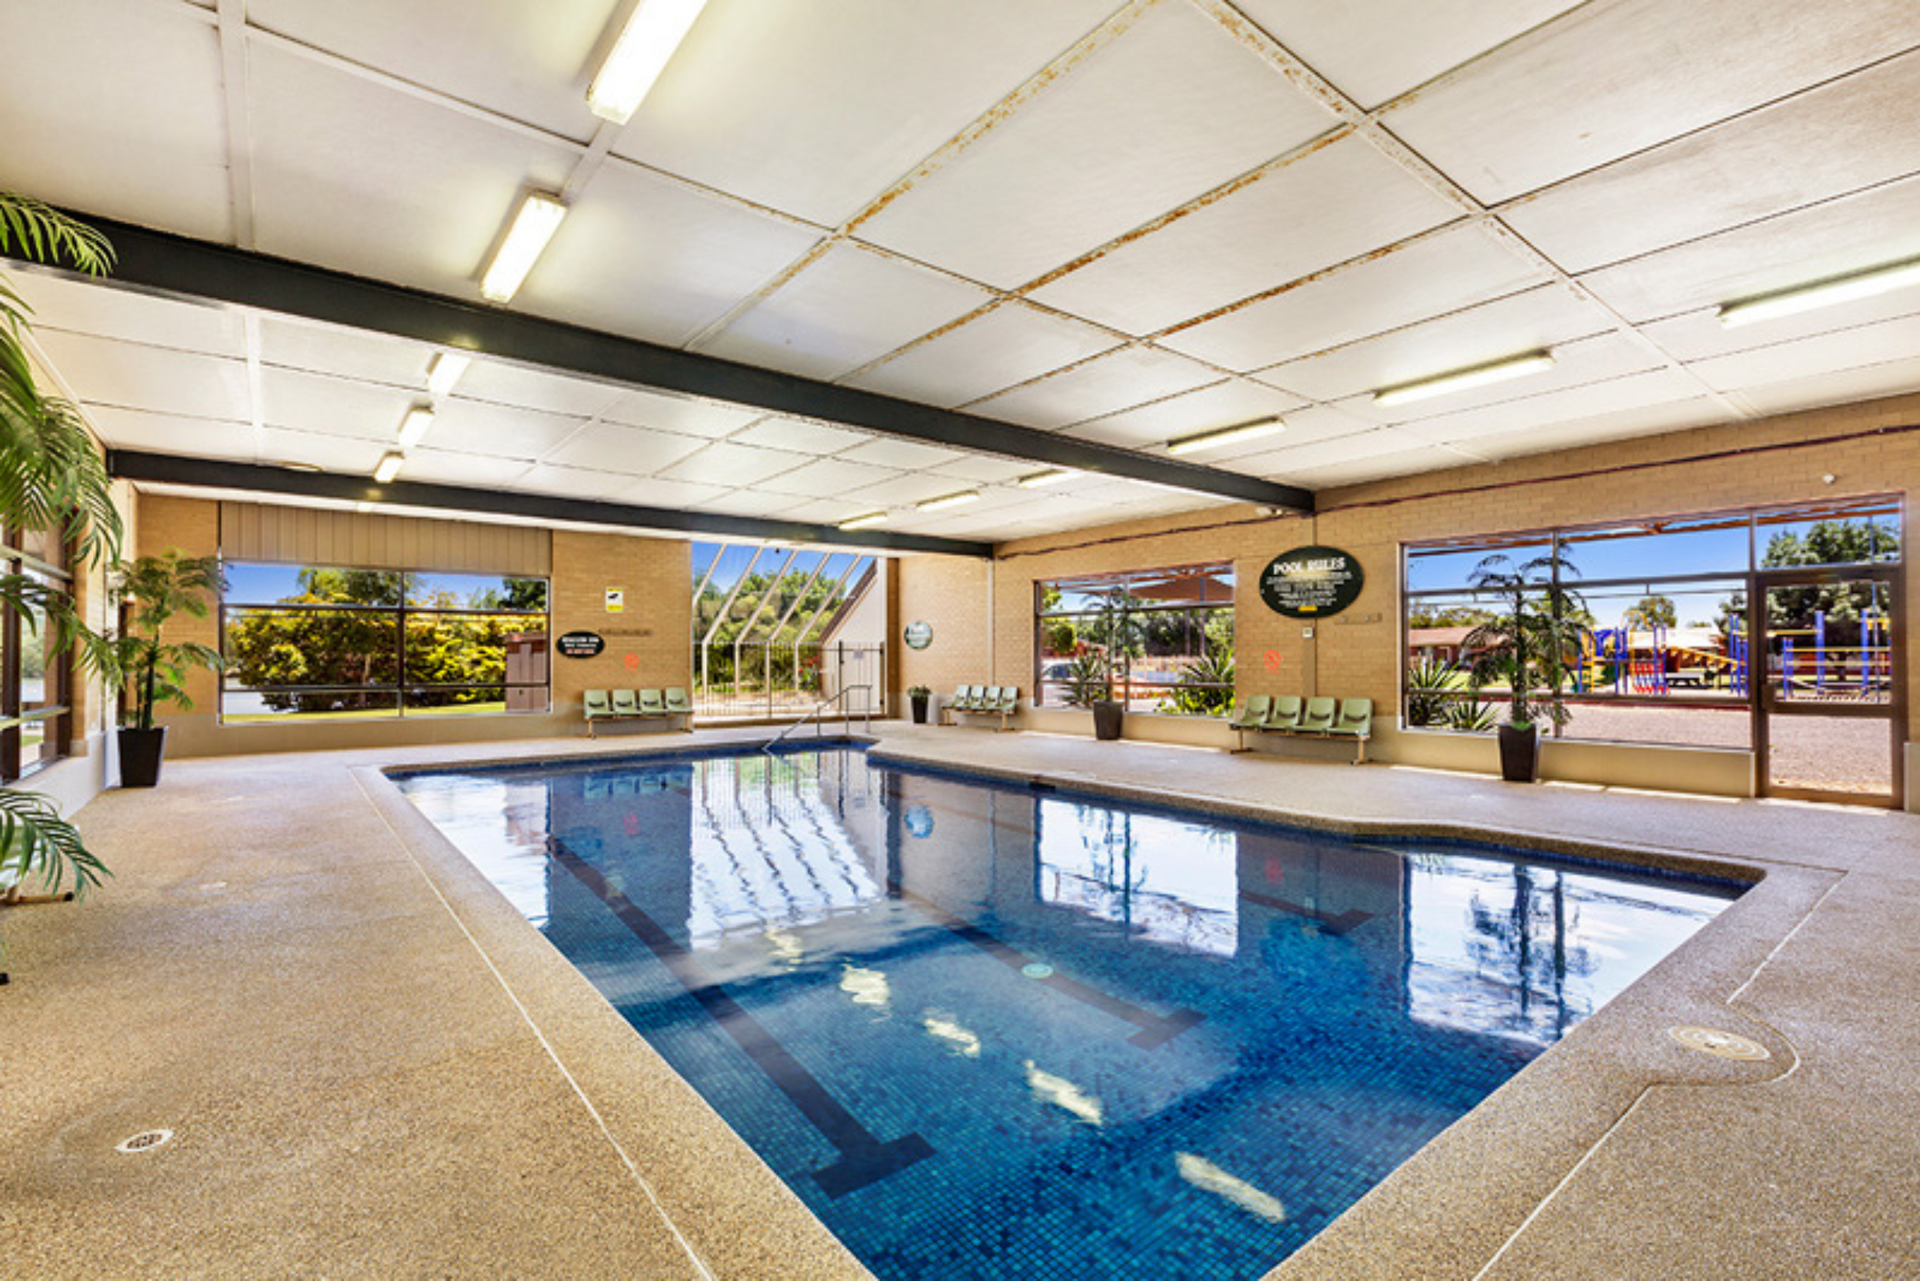 A large indoor swimming pool with a lot of windows